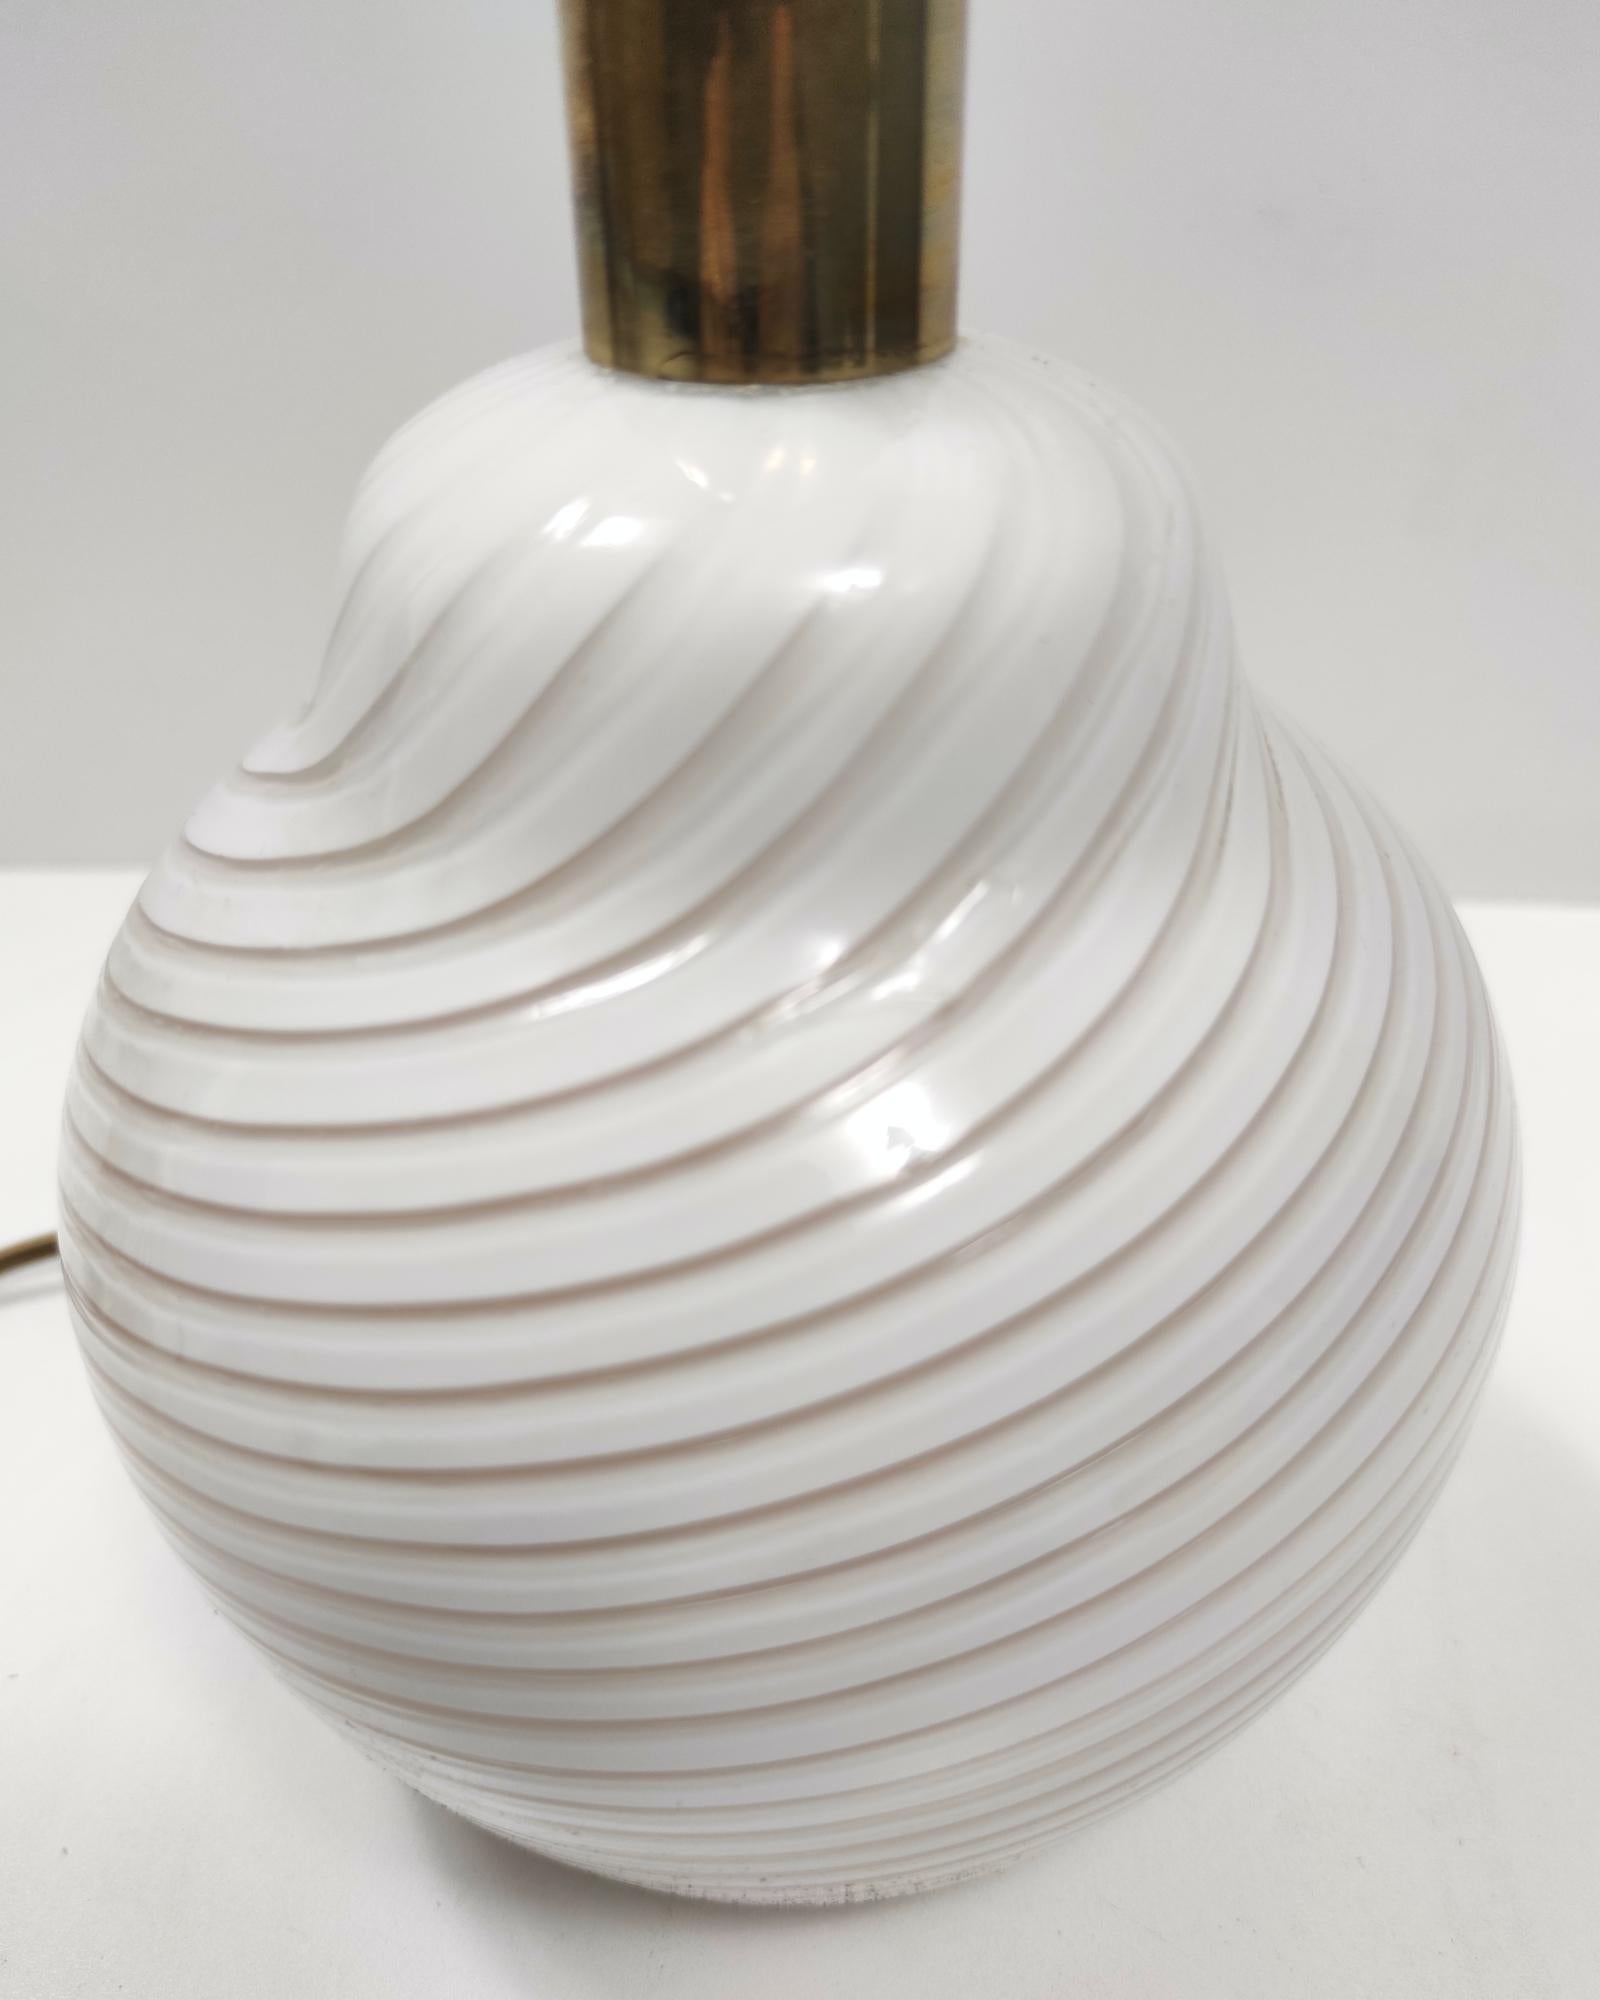 Italian Murano Glass Table Lamp by Lino Tagliapietra Produced by Paf, Italy, 1980s For Sale